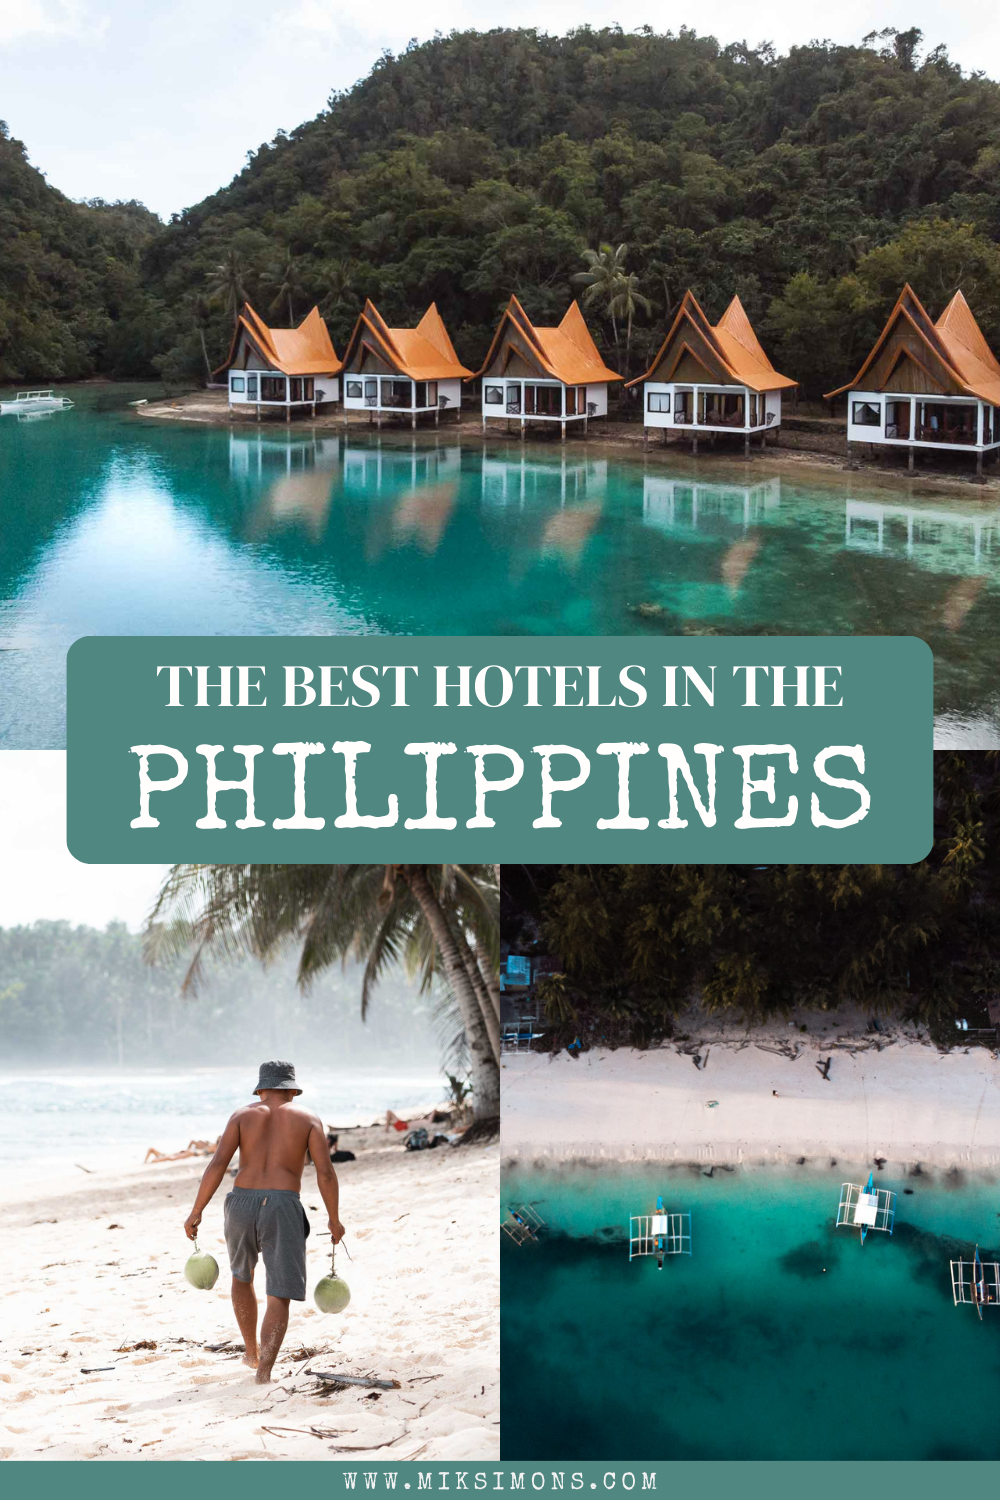 42 x Best hotels in the Philippines